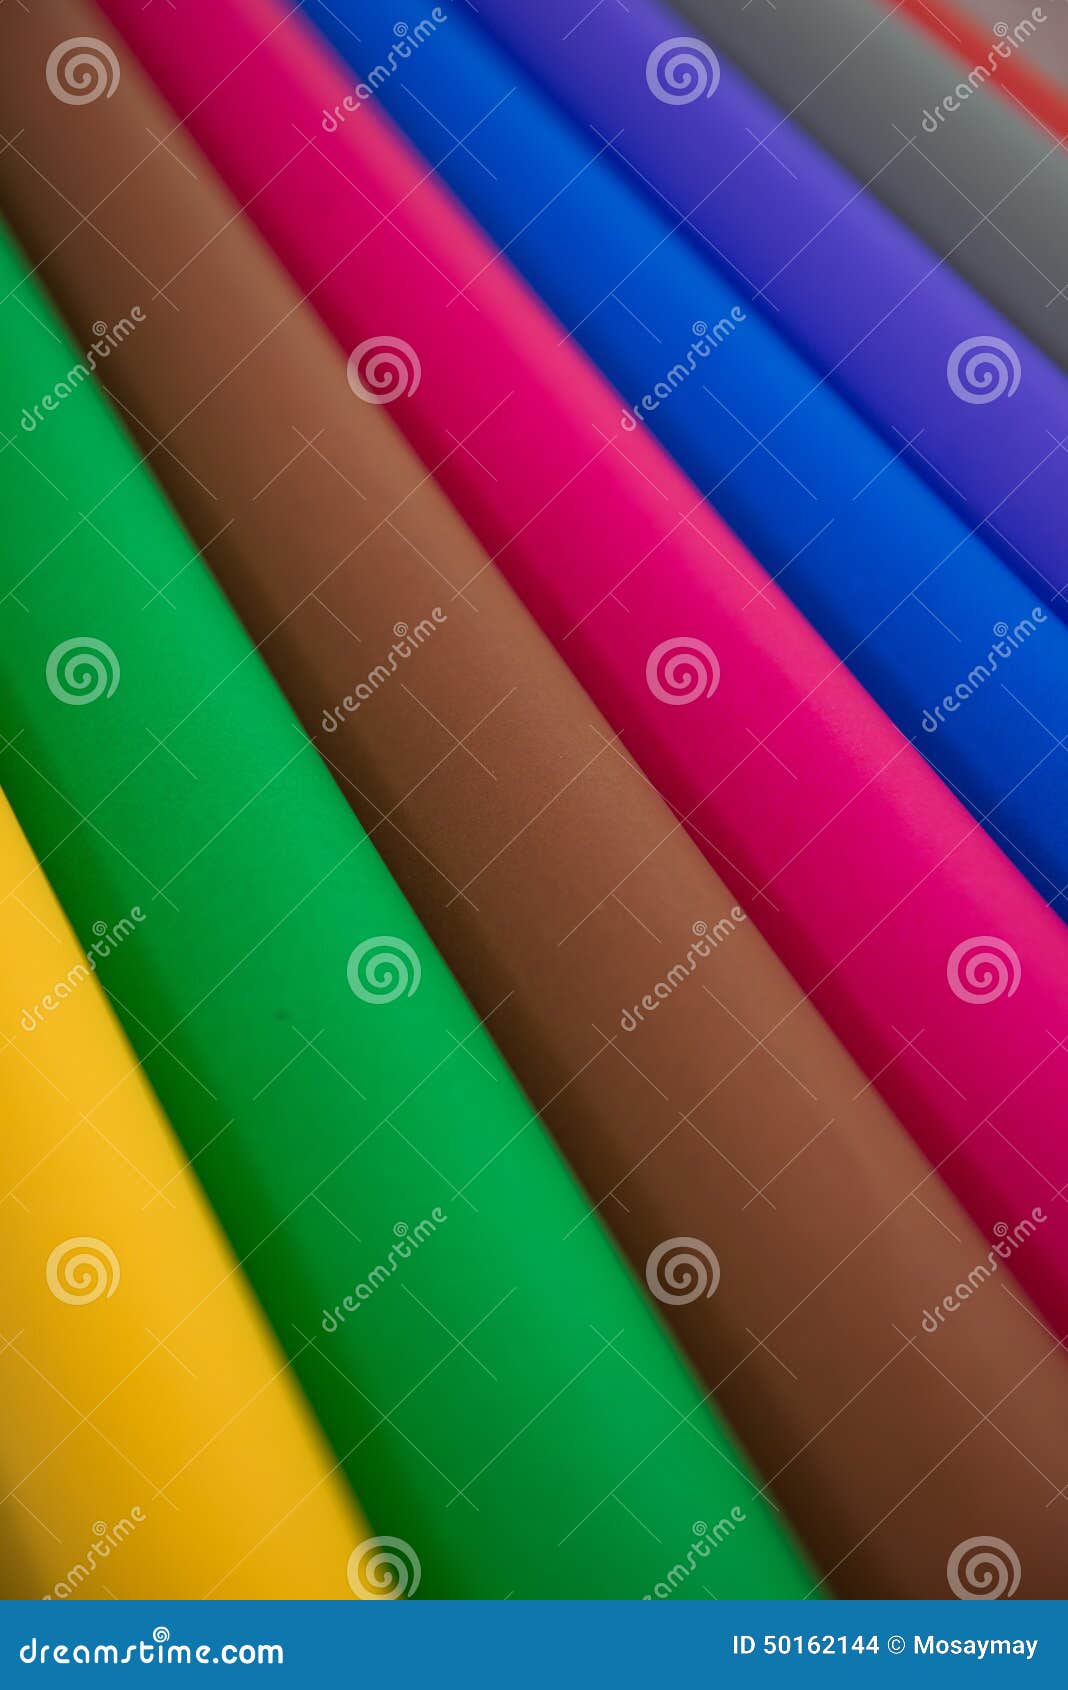 Lot of Color Paper for Crafts Idea Stock Photo - Image of green, crafts:  50162144